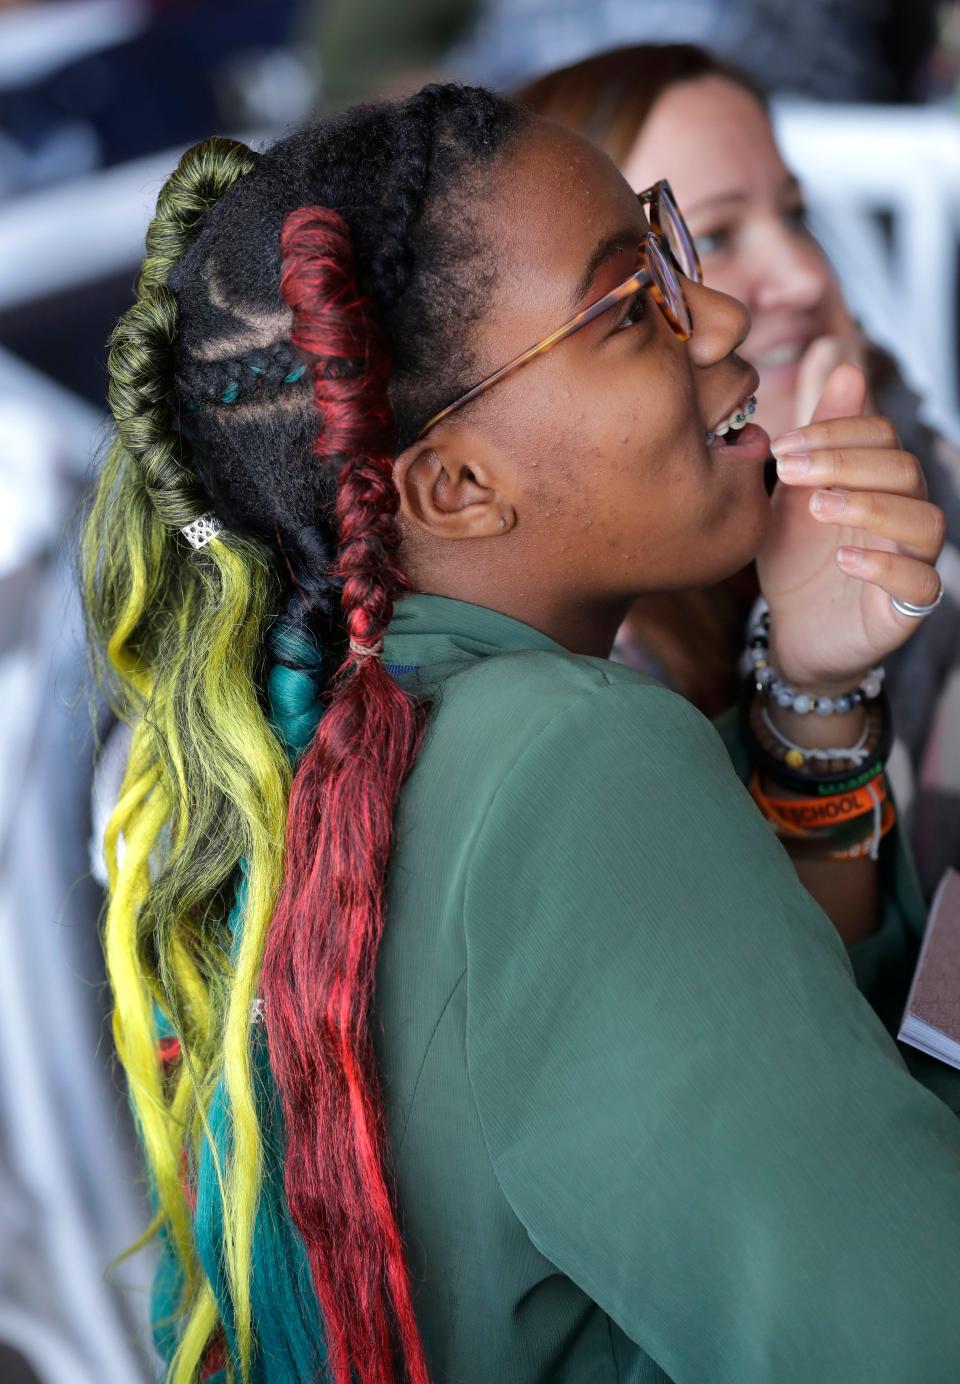 Ashley Nelson, 14, of Manitowoc participates in a Black history quiz wearing braids with colorful extensions during the Afro Hair Fair Saturday, February 25, 2023, at Poplar Hall in Appleton, Wis. Dan Powers/USA TODAY NETWORK-Wisconsin. 